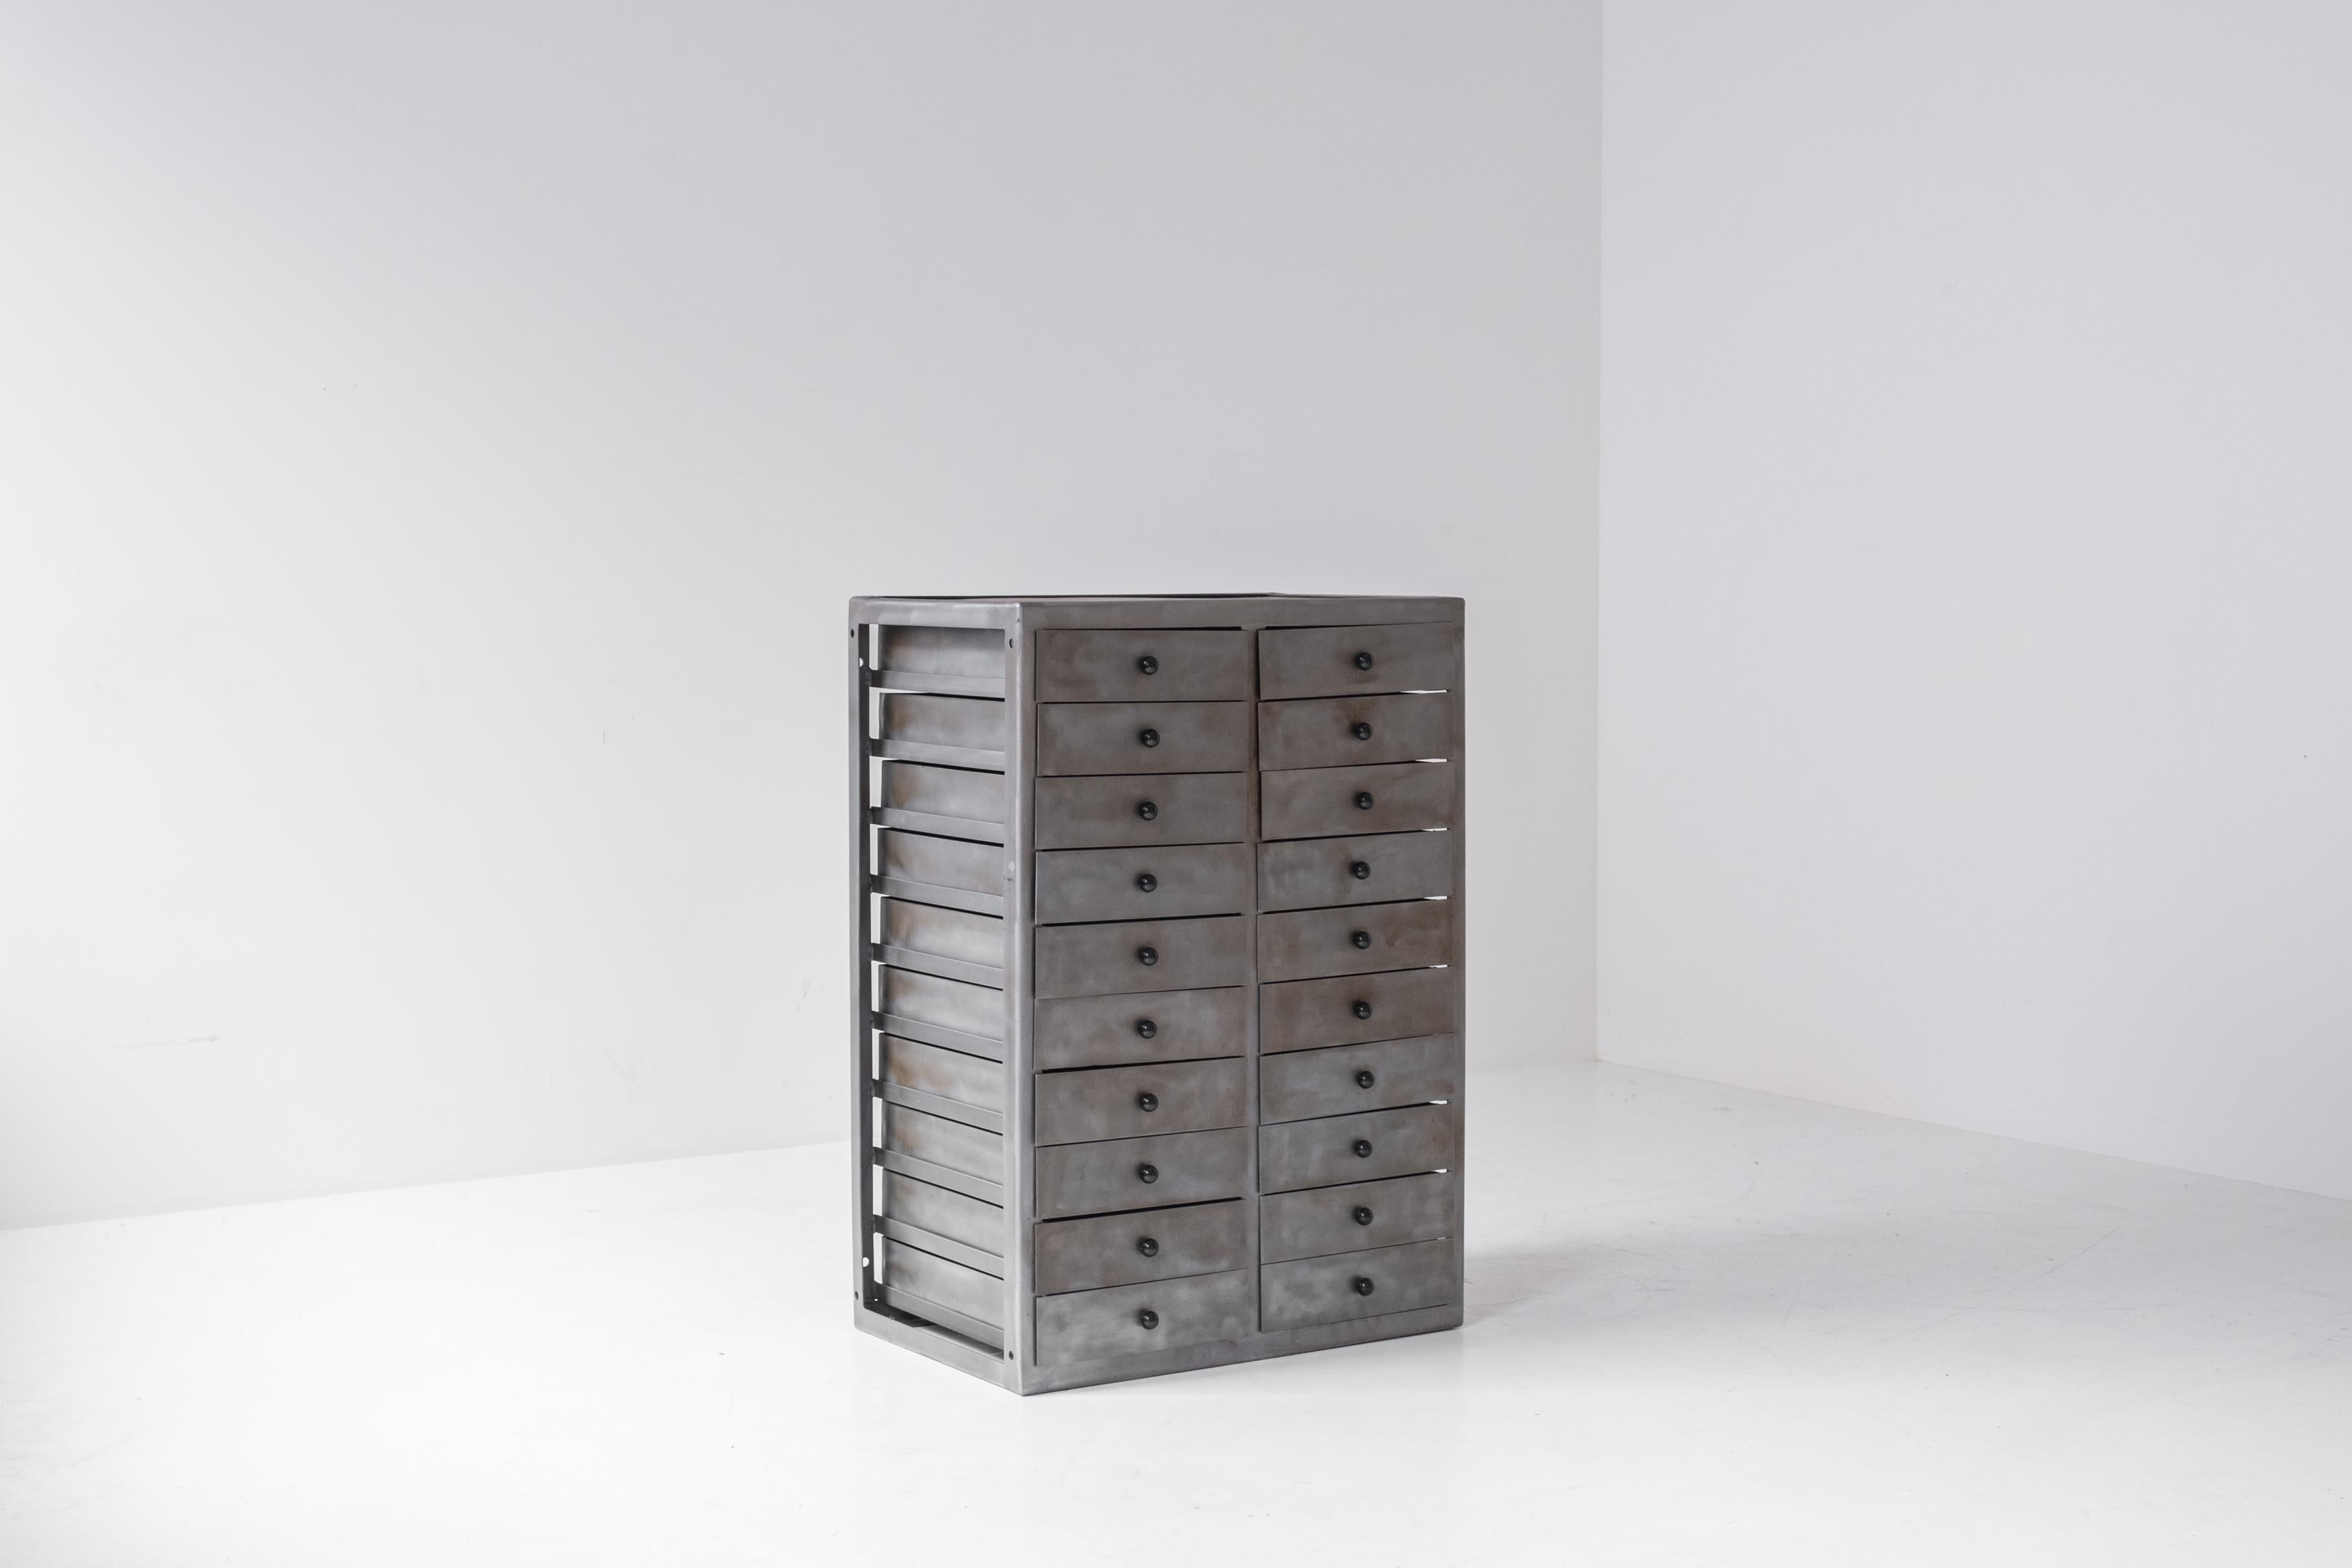 Industrial chest of drawers designed in the Netherlands around the 1960s. This cabinet is made out of steel and features two series of each 10 drawers. The open frame gives the cabinet an extra dimension and makes it playful at the same time.